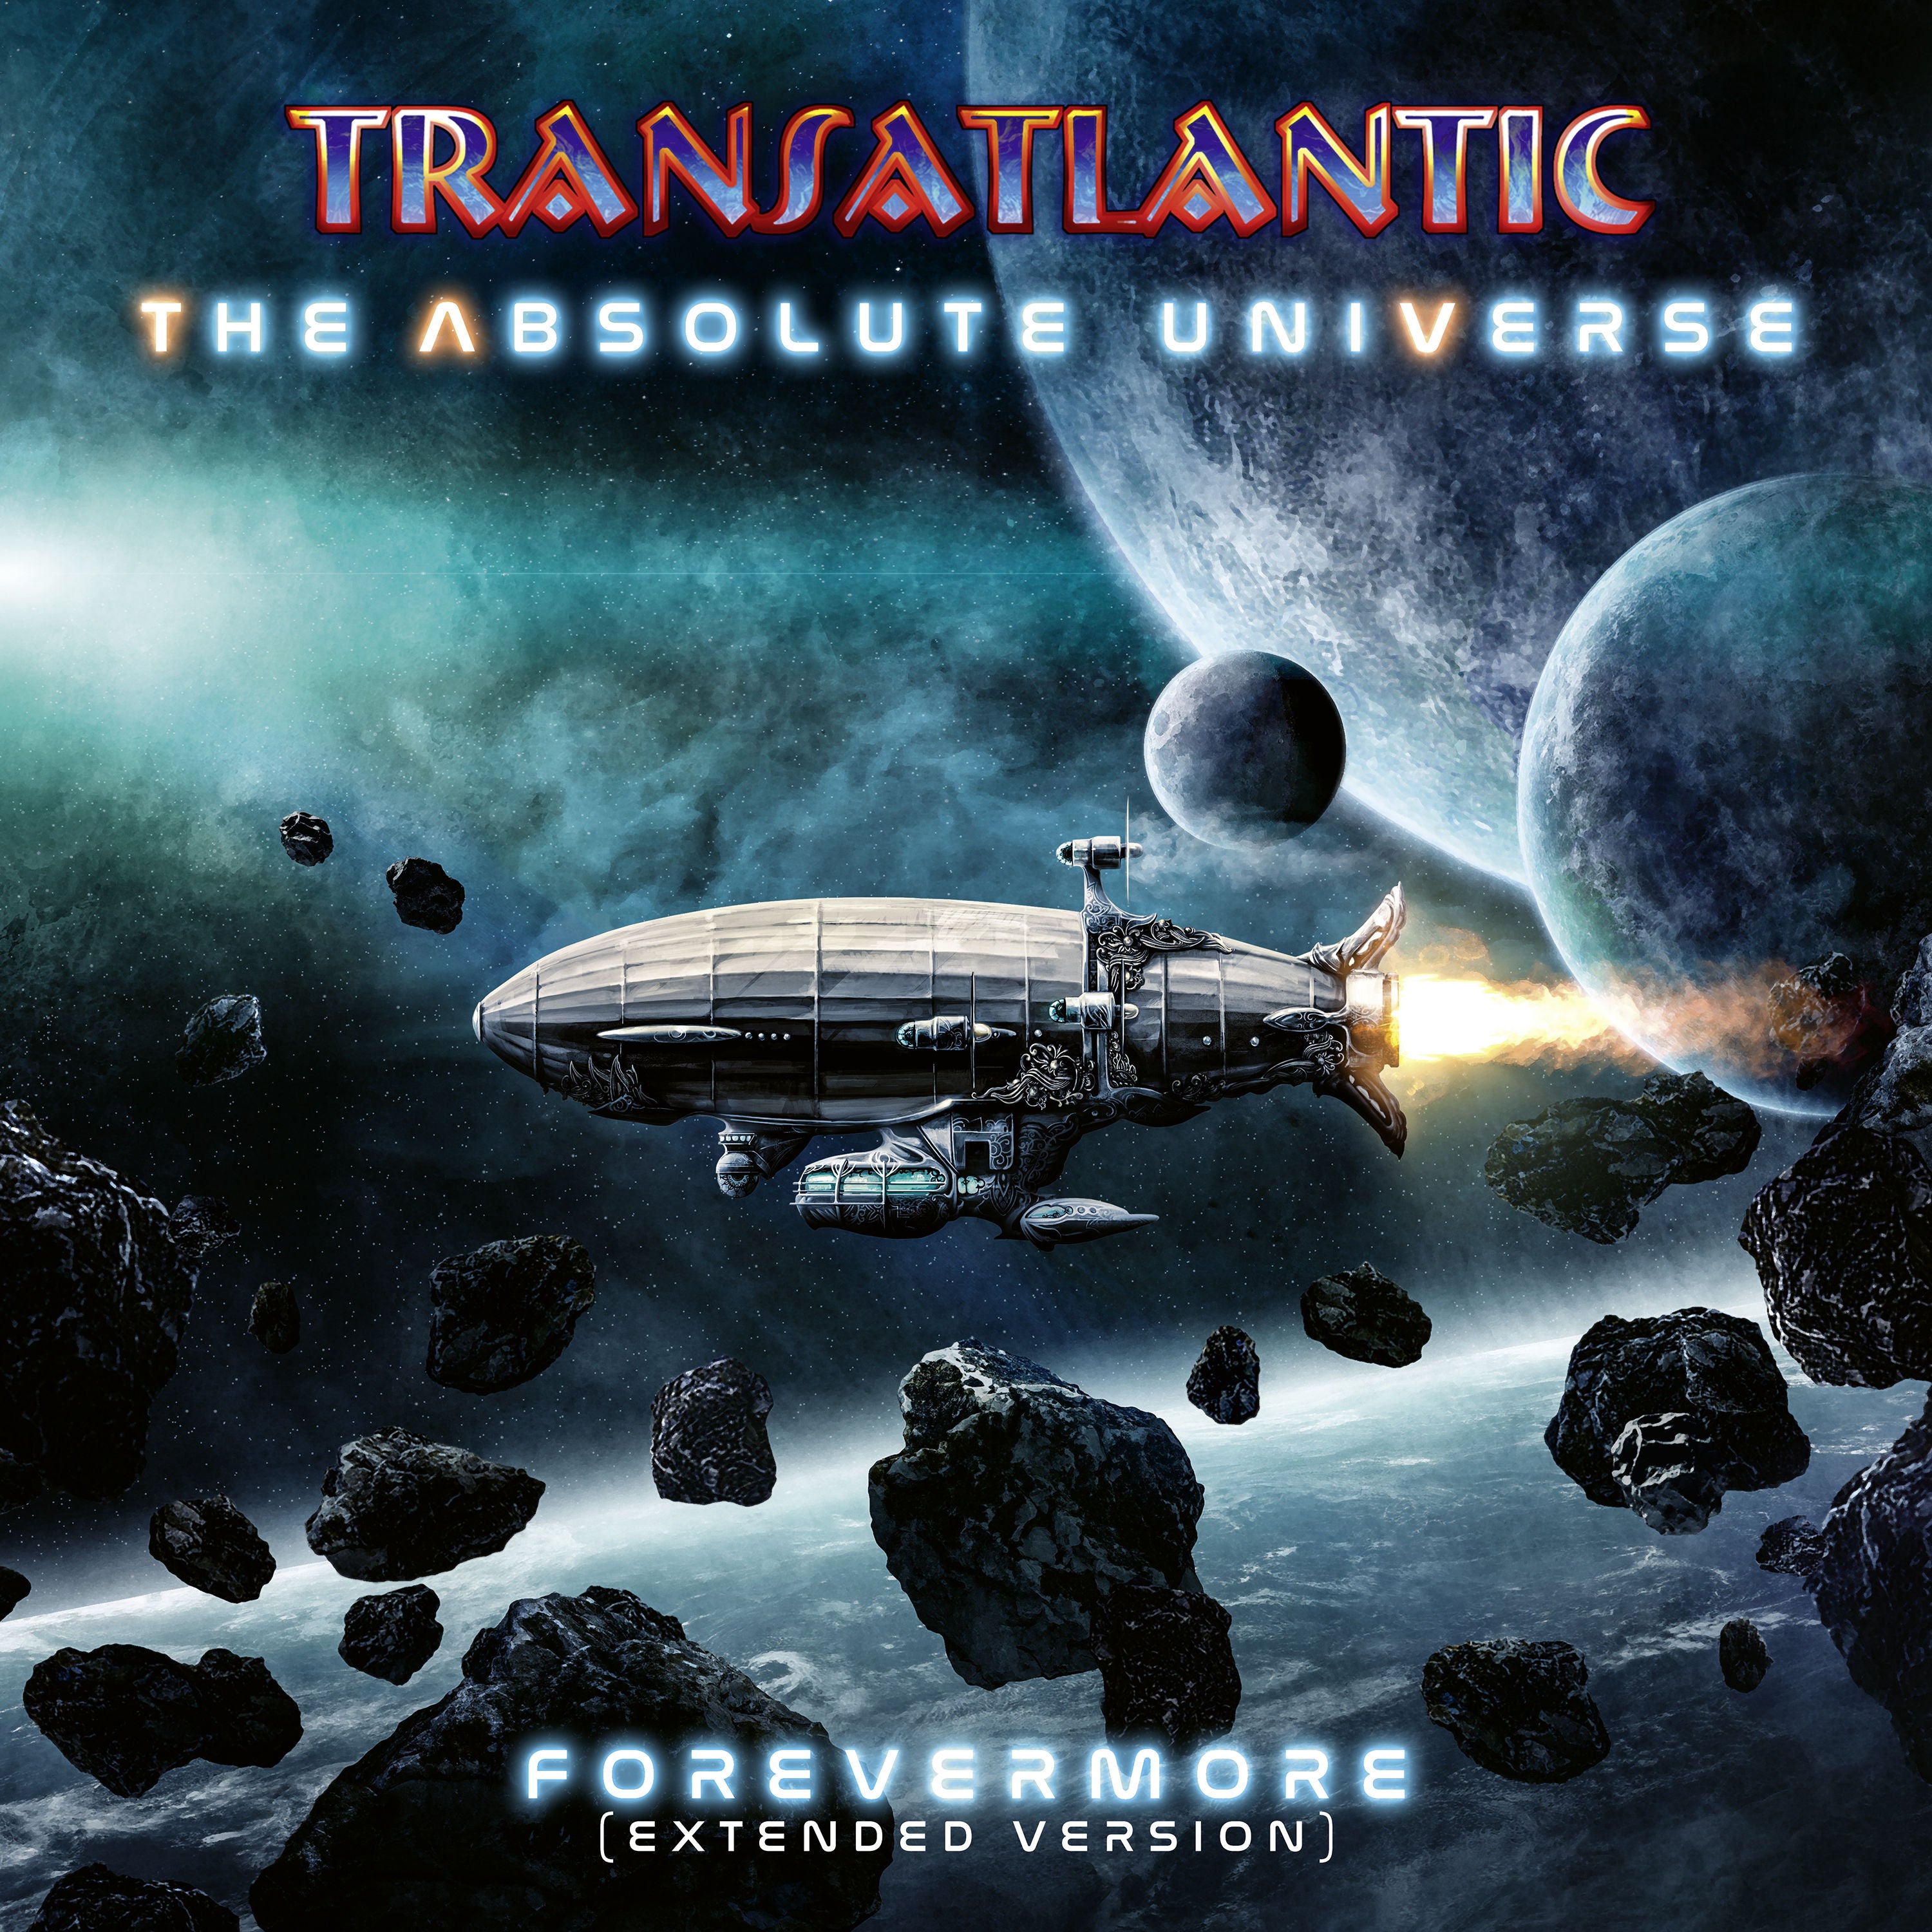 Transatlantic - The Absolute Universe - Forevermore (Extended Version): 2CD